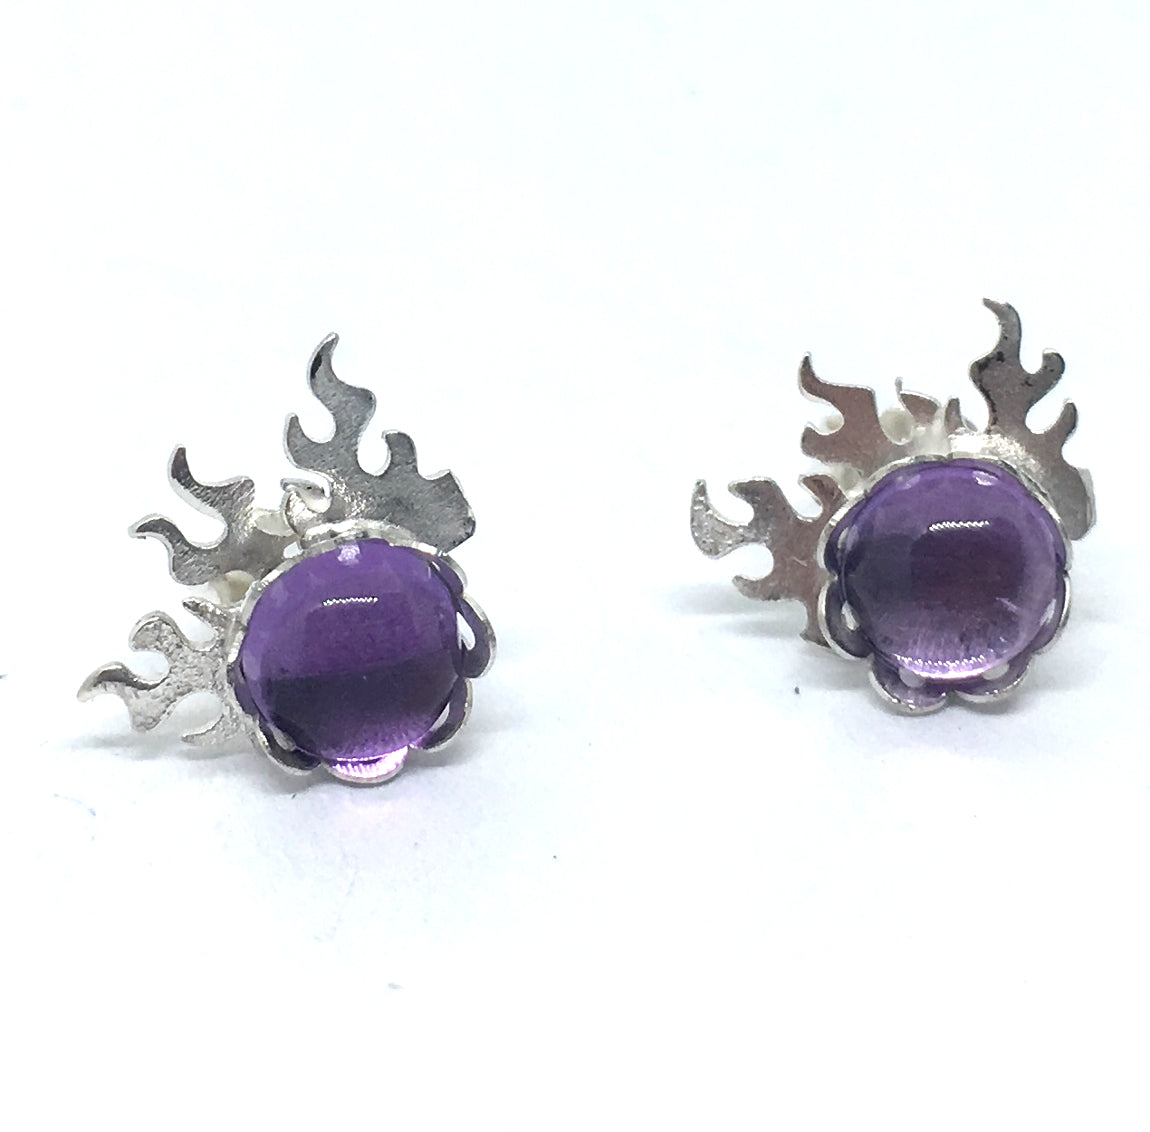 Flaming Earrings with Amethyst in Sterling Silver